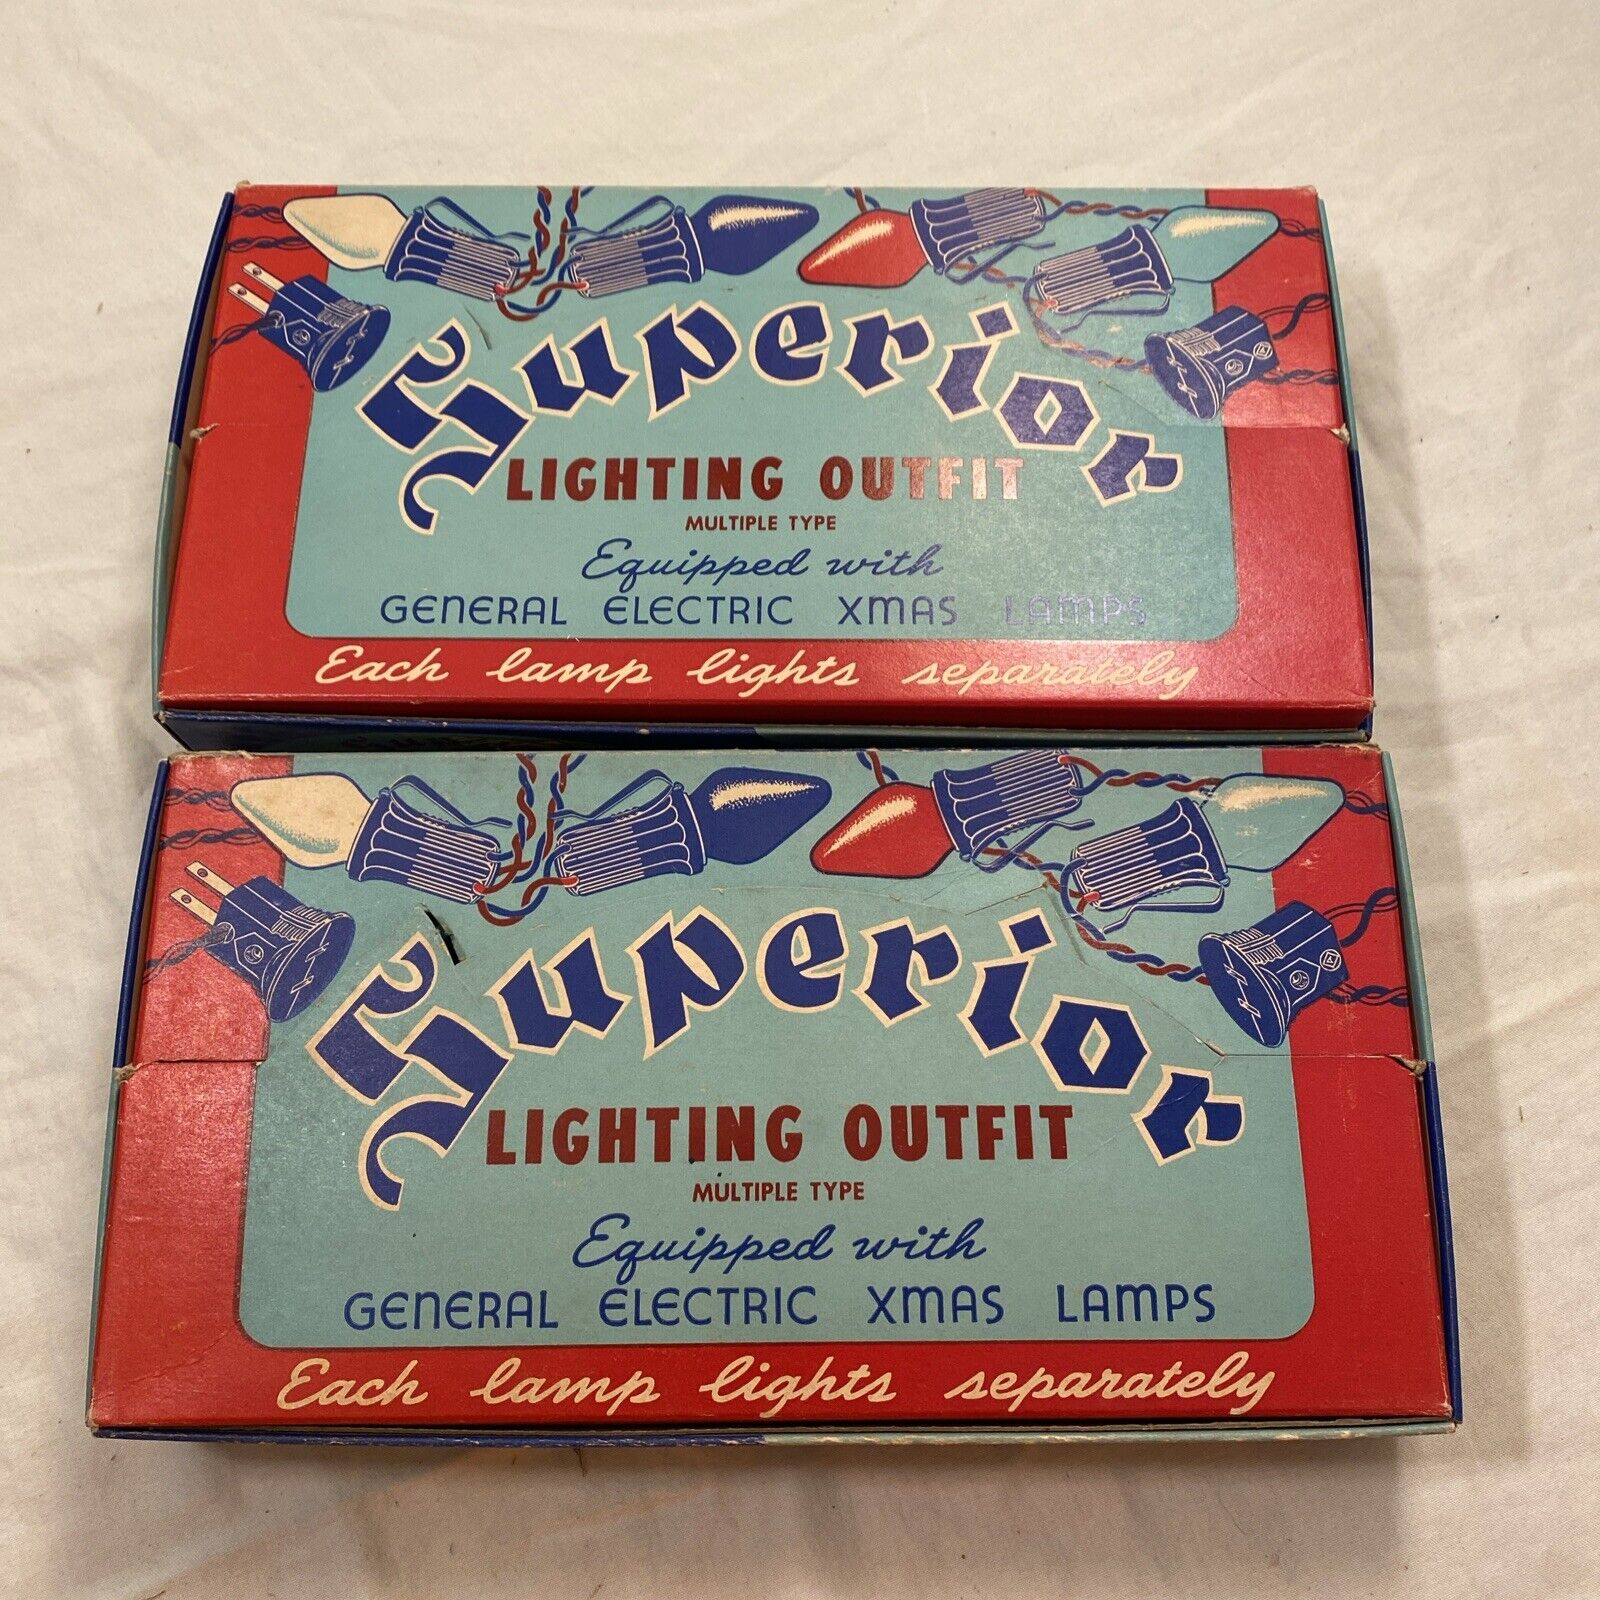 ANTIQUE SUPERIOR LIGHTING OUTFIT GENERAL ELECTRIC CHRISTMAS LIGHTS W/BOX 2 SETS